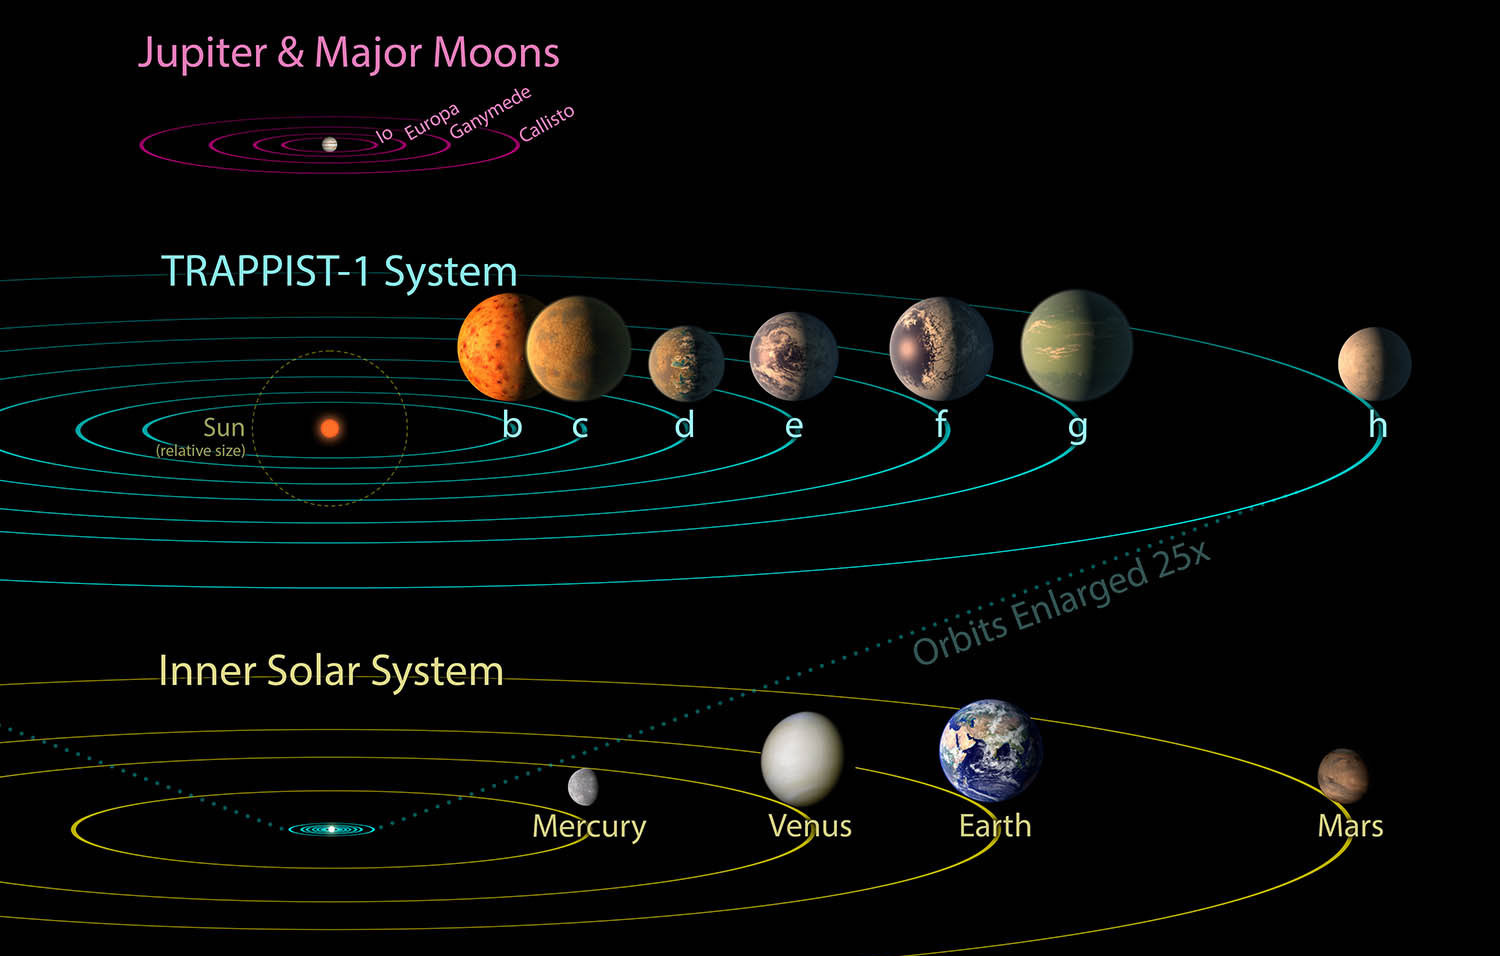 TRAPPIST-1 exoplanets